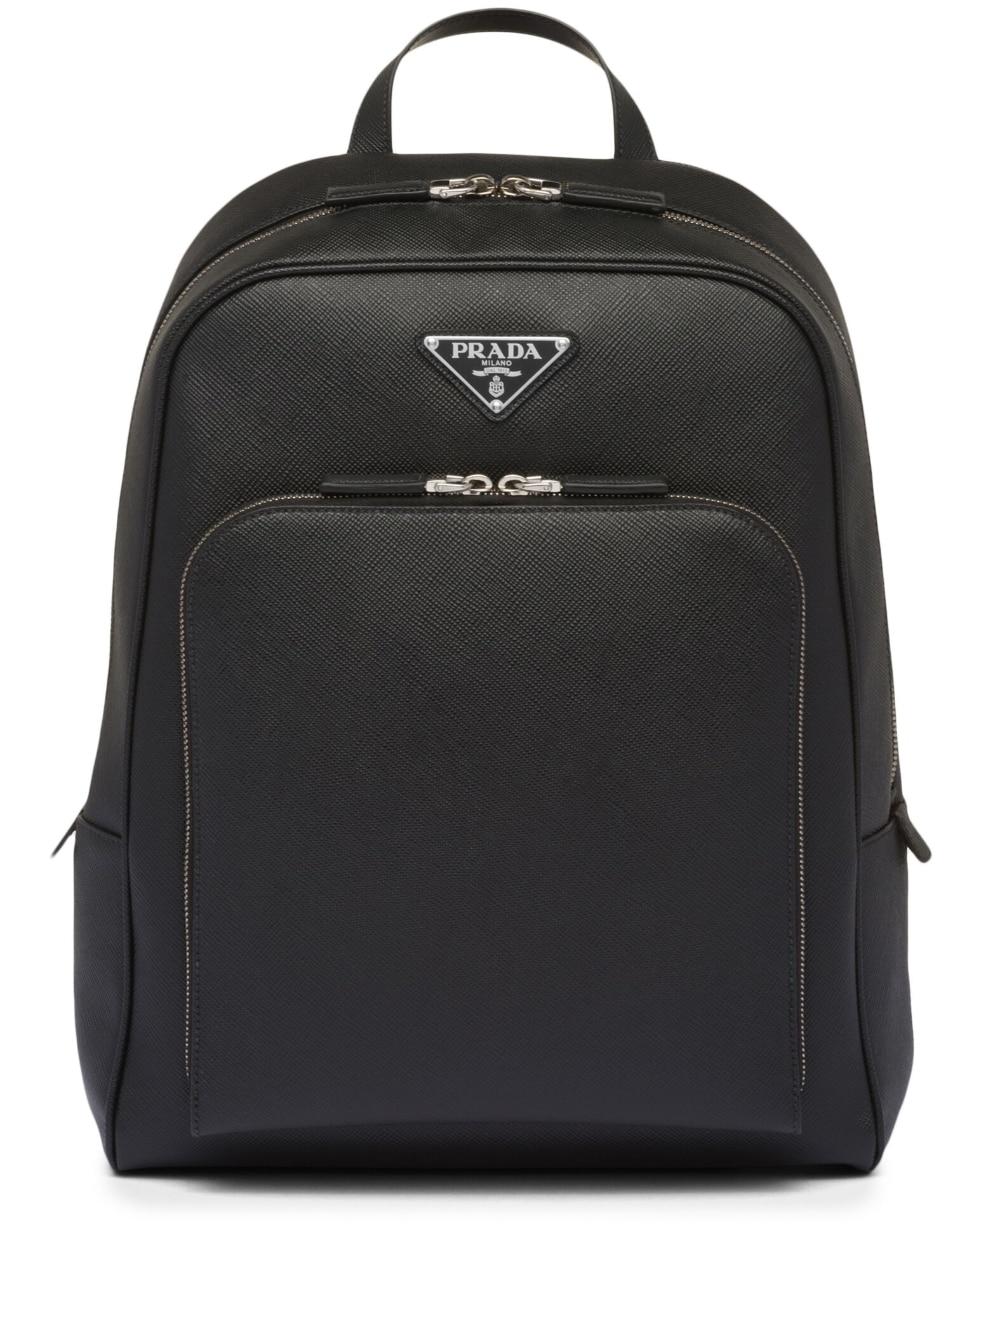 Prada Saffiano-leather Triangle-logo Backpack in Black for Men | Lyst